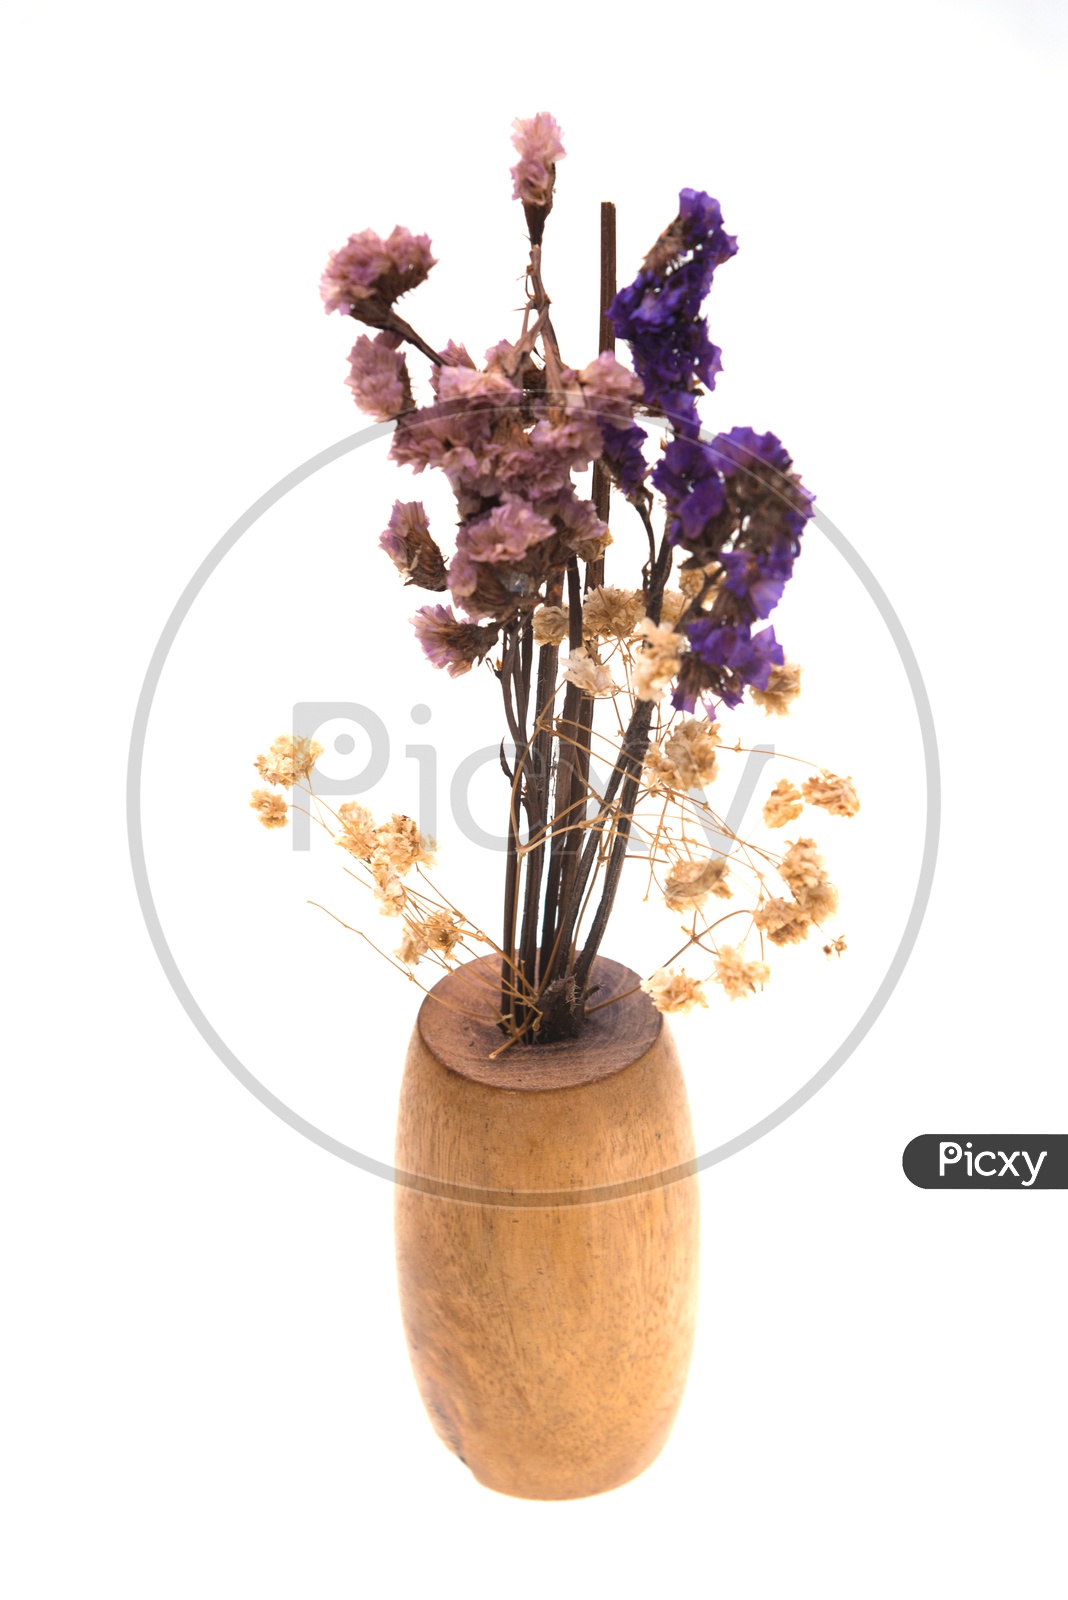 Summer  Dried Vintage Flower In a Vase on Isolated White